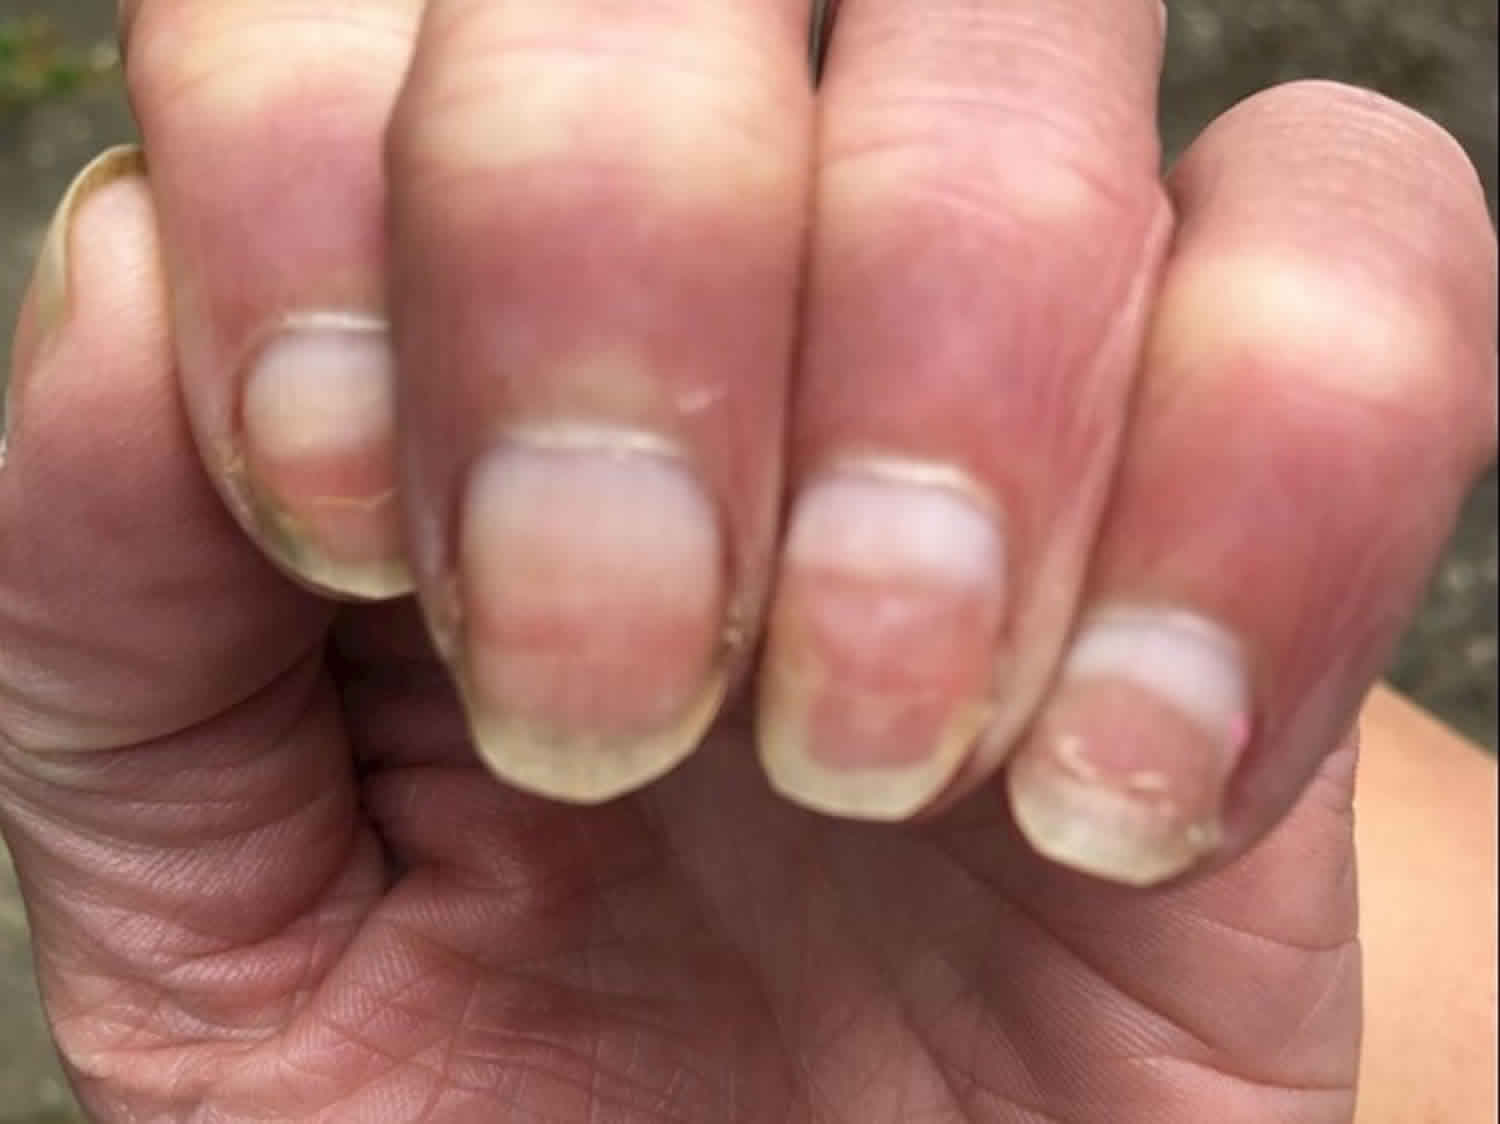 terry’s nails